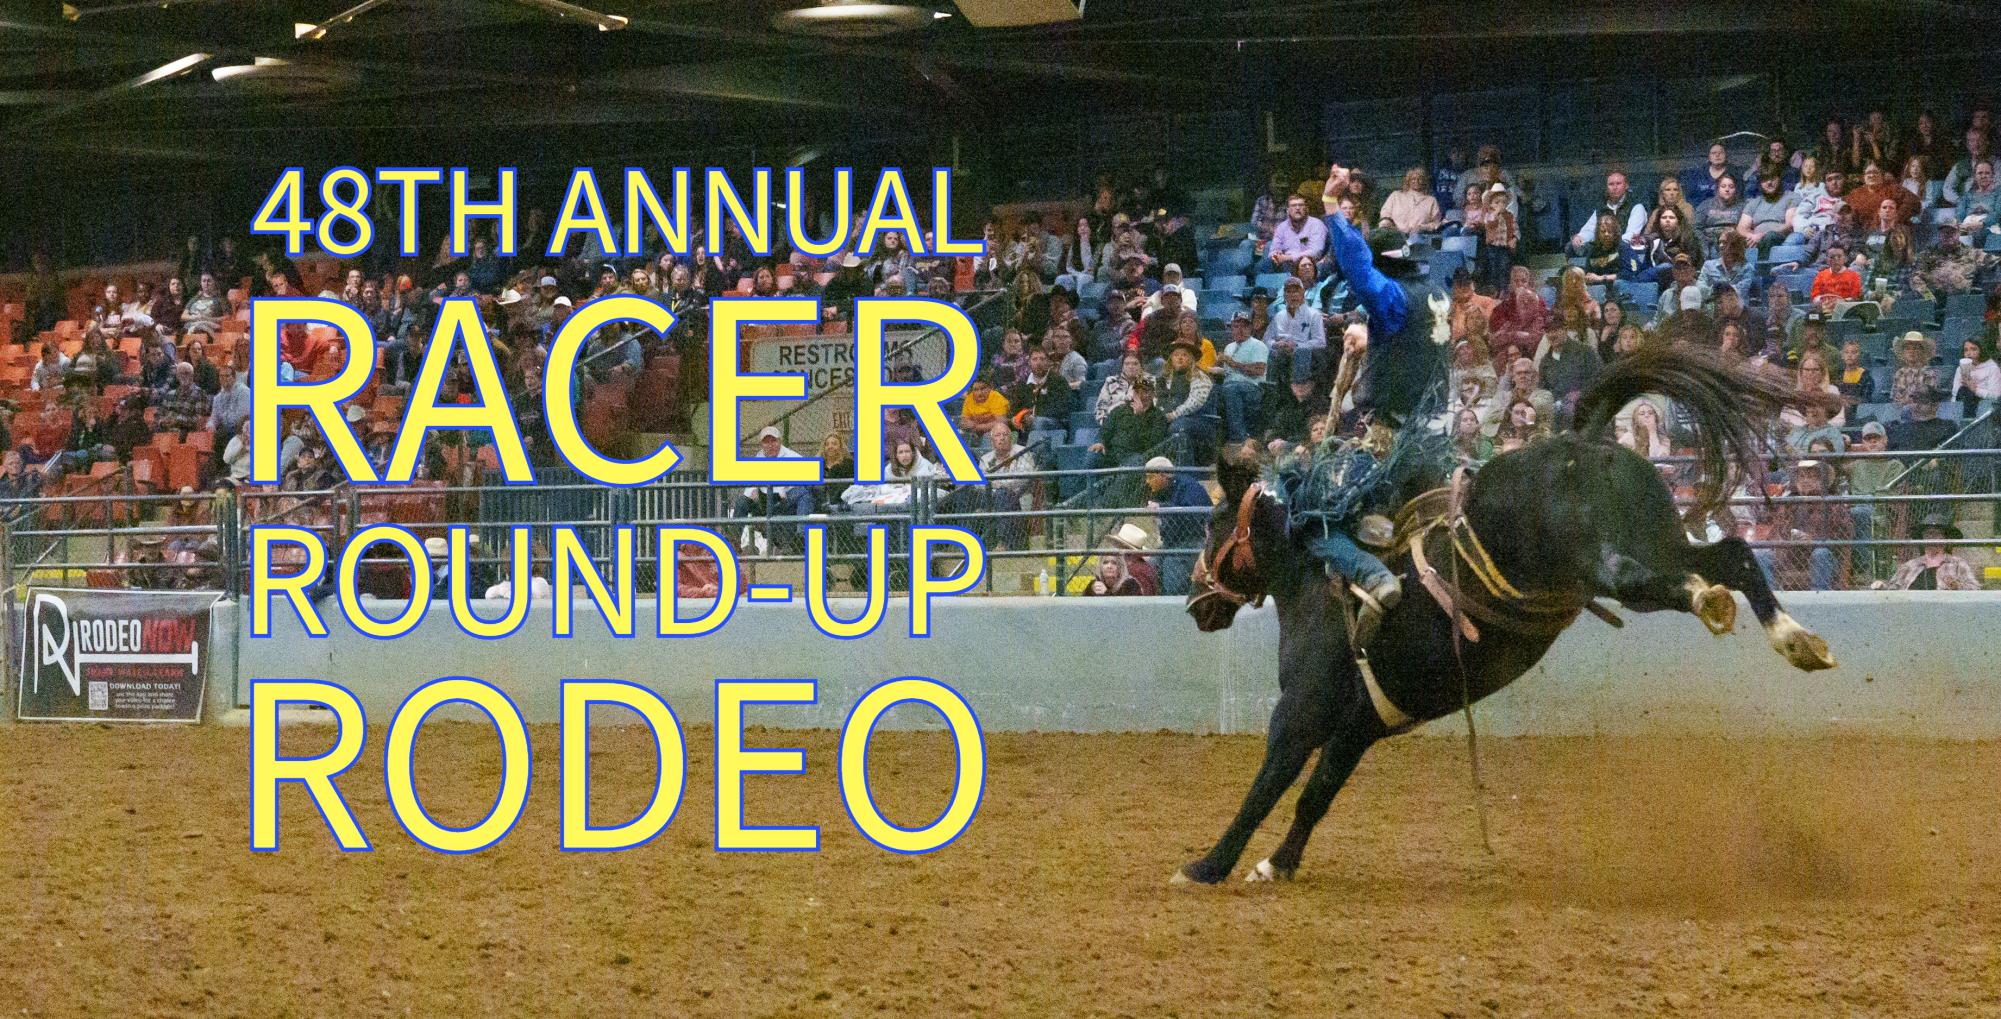 The 48th annual Racer Round-up Rodeo was held at the Cherry Expo Center on Nov. 16-18. The championship rounds of all events were held on Saturday, Nov. 18. 